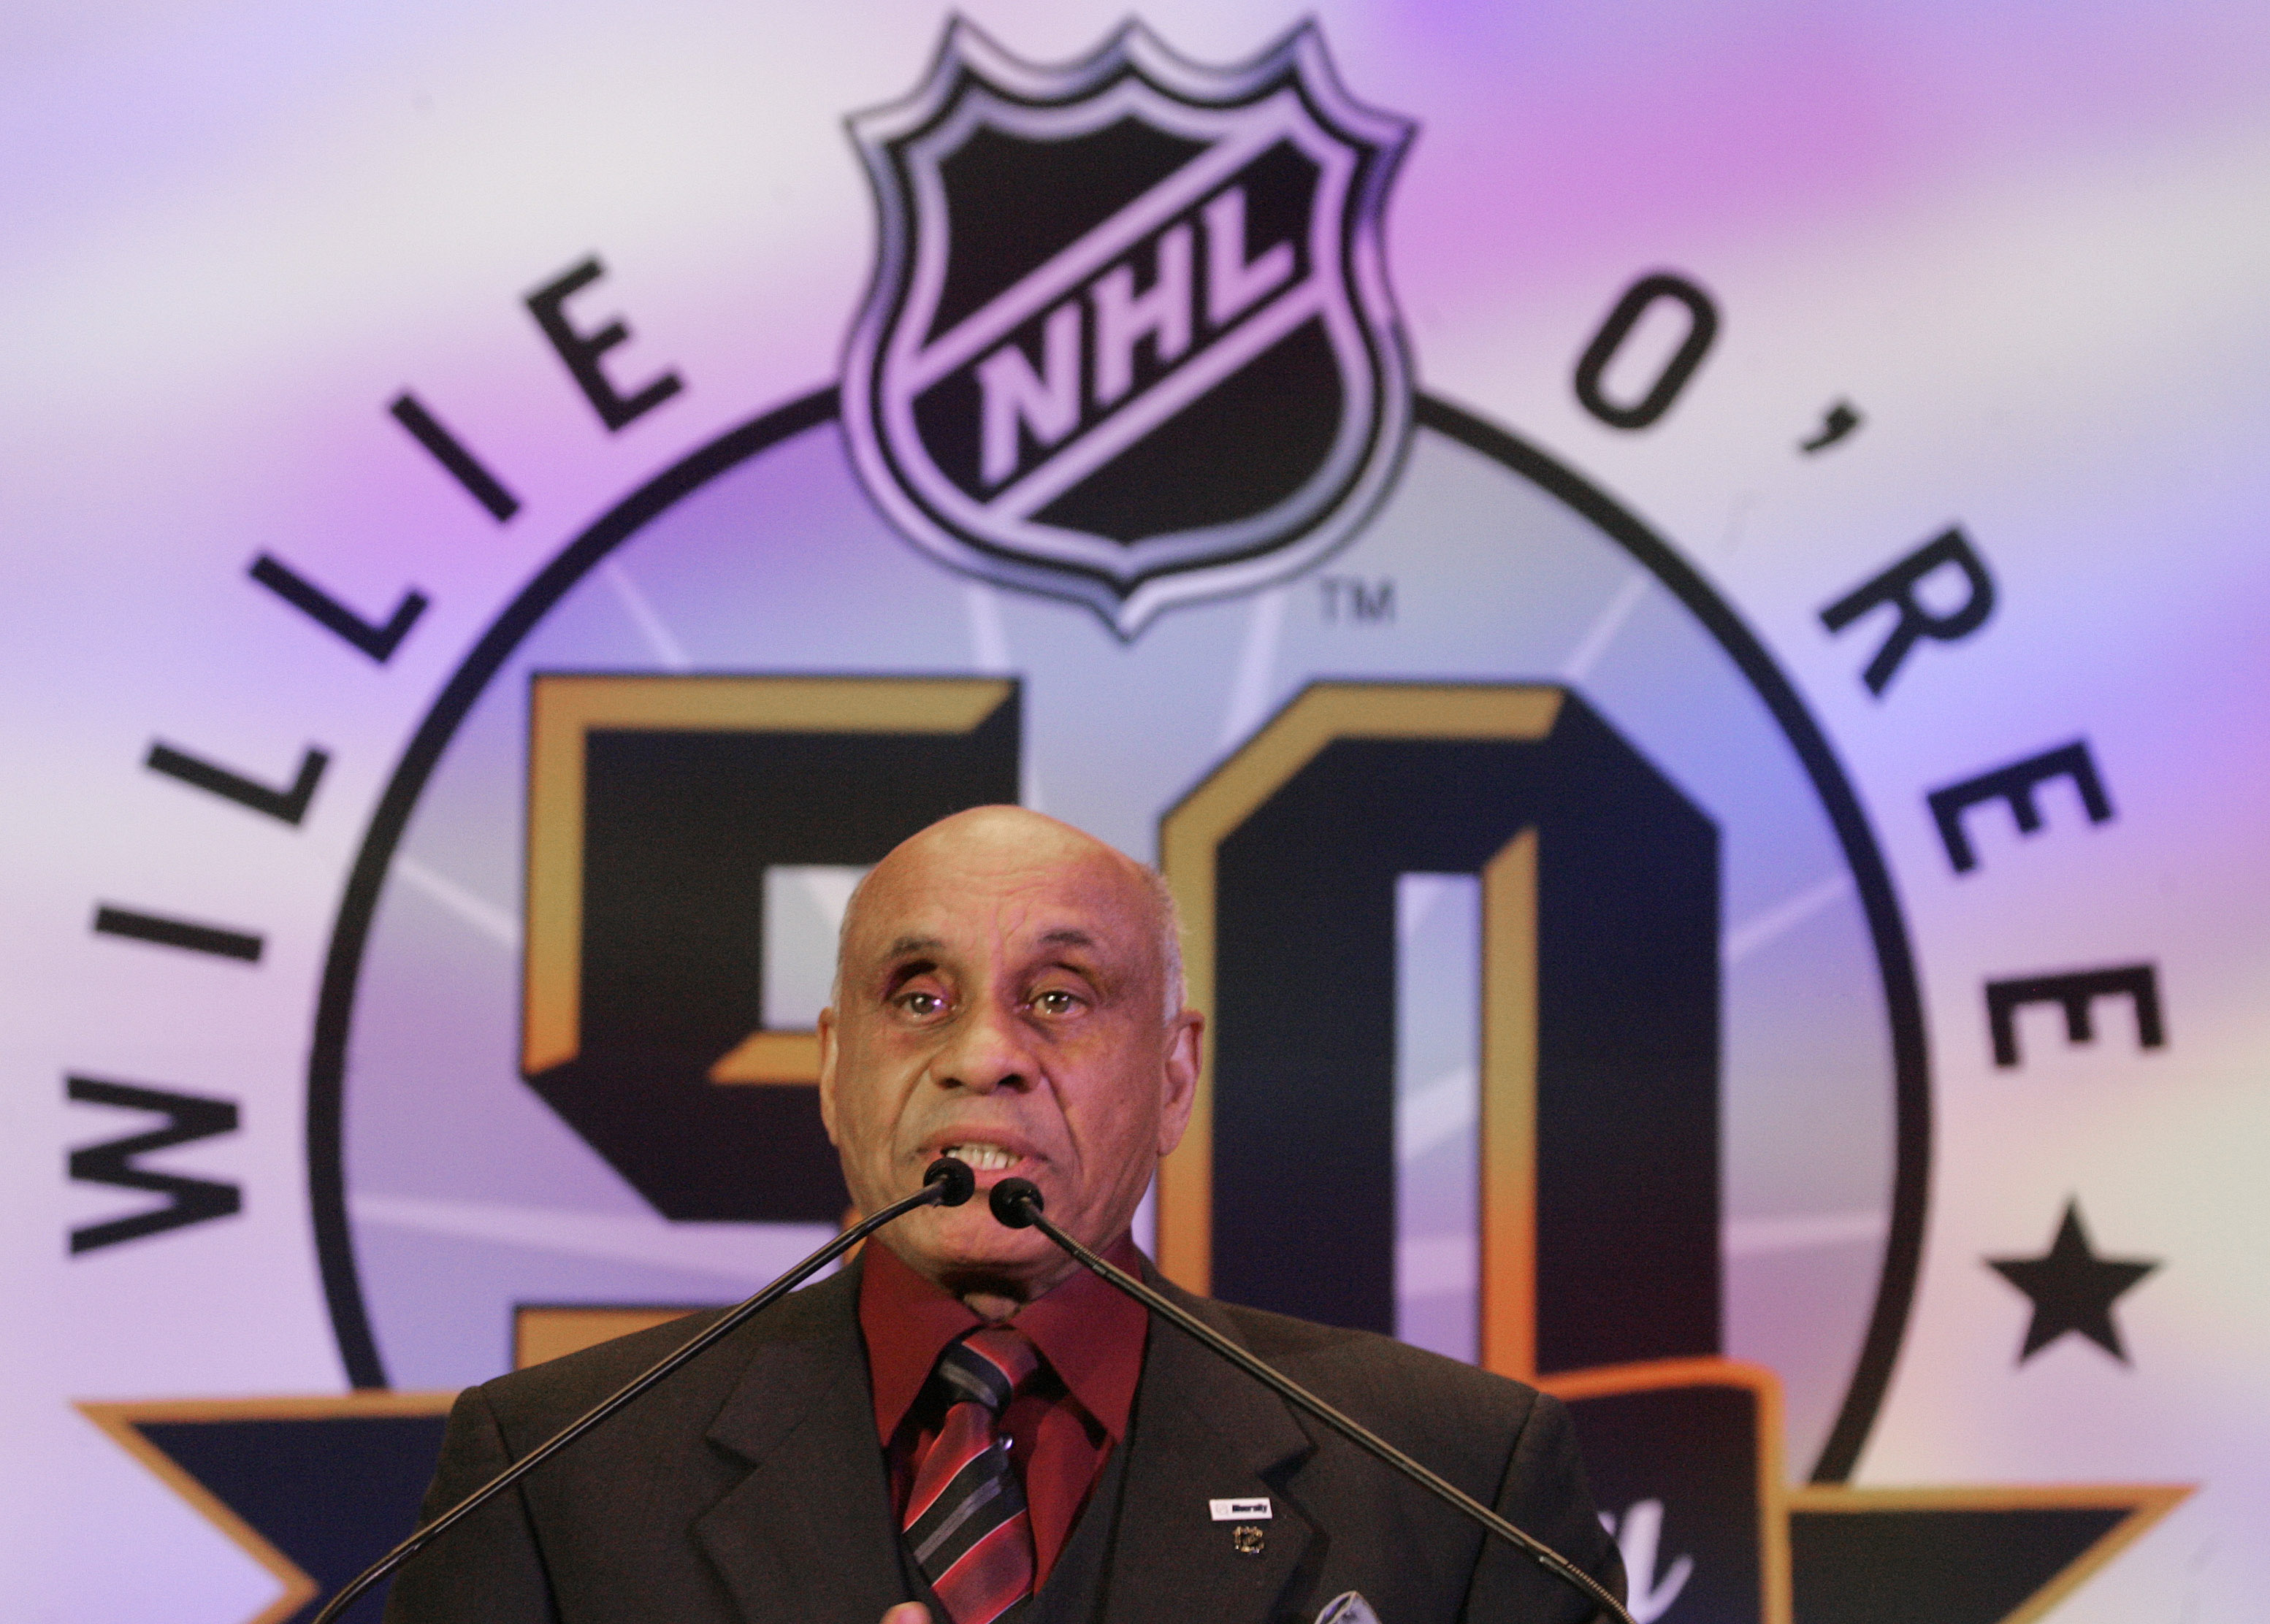 Bruins To Retire Willie O'Ree's #22 in February